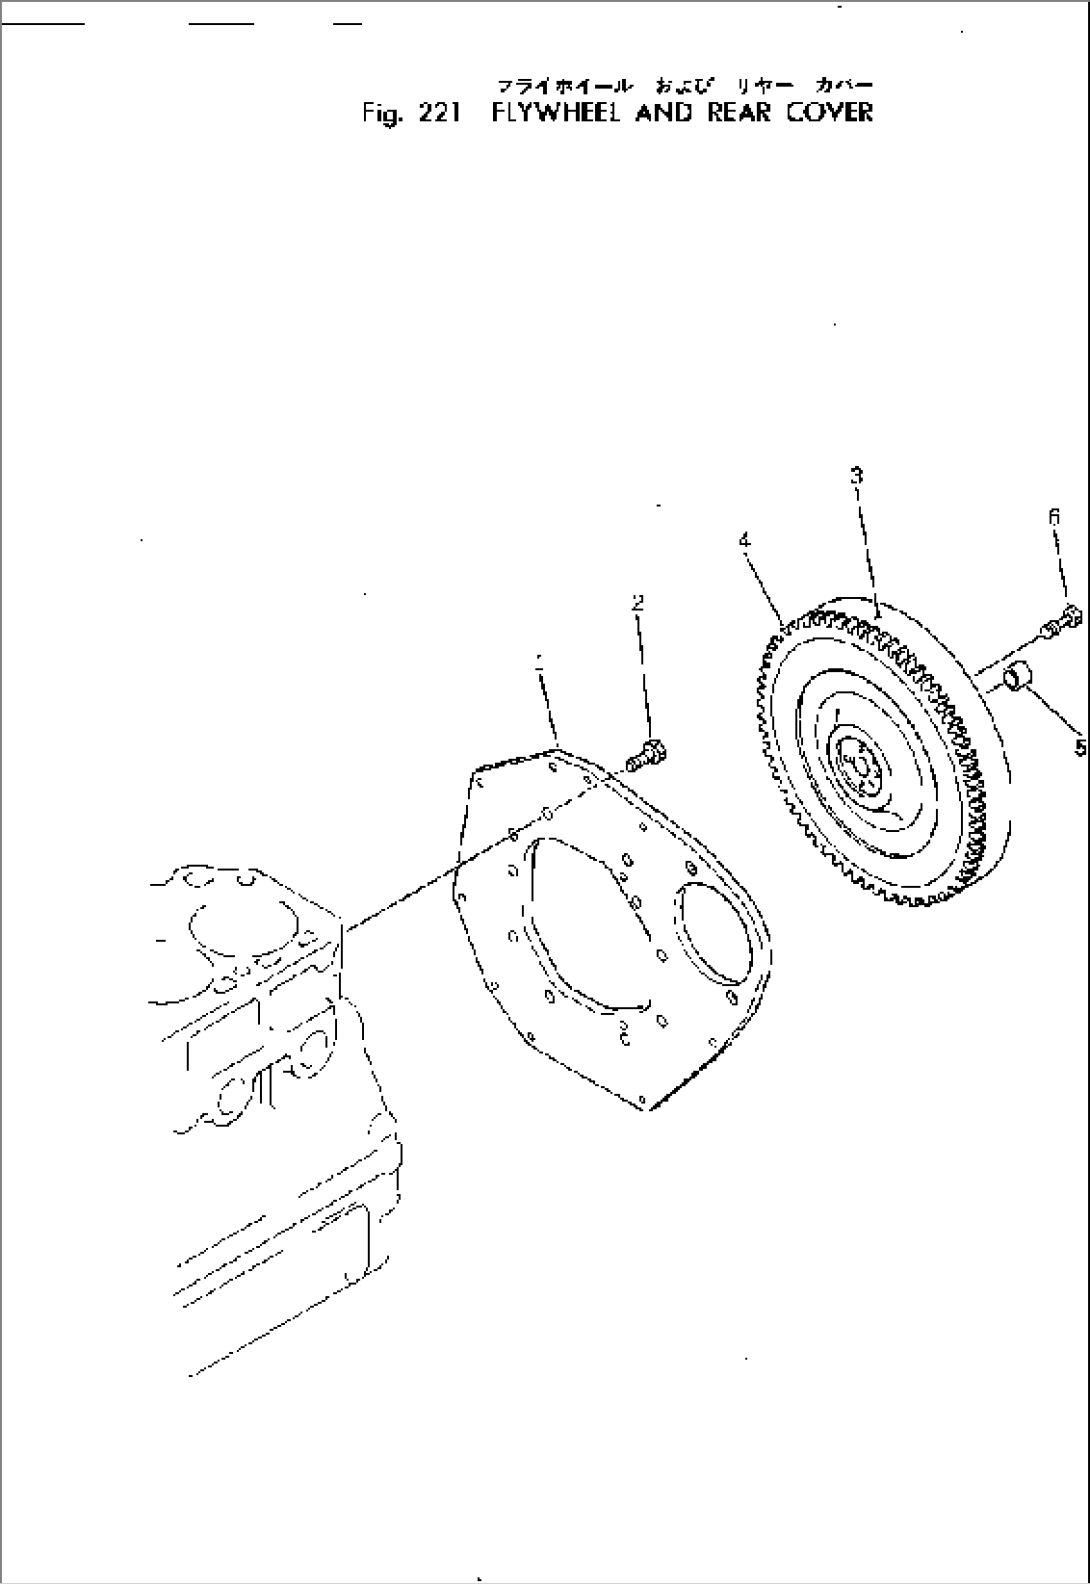 FLYWHEEL AND REAR COVER